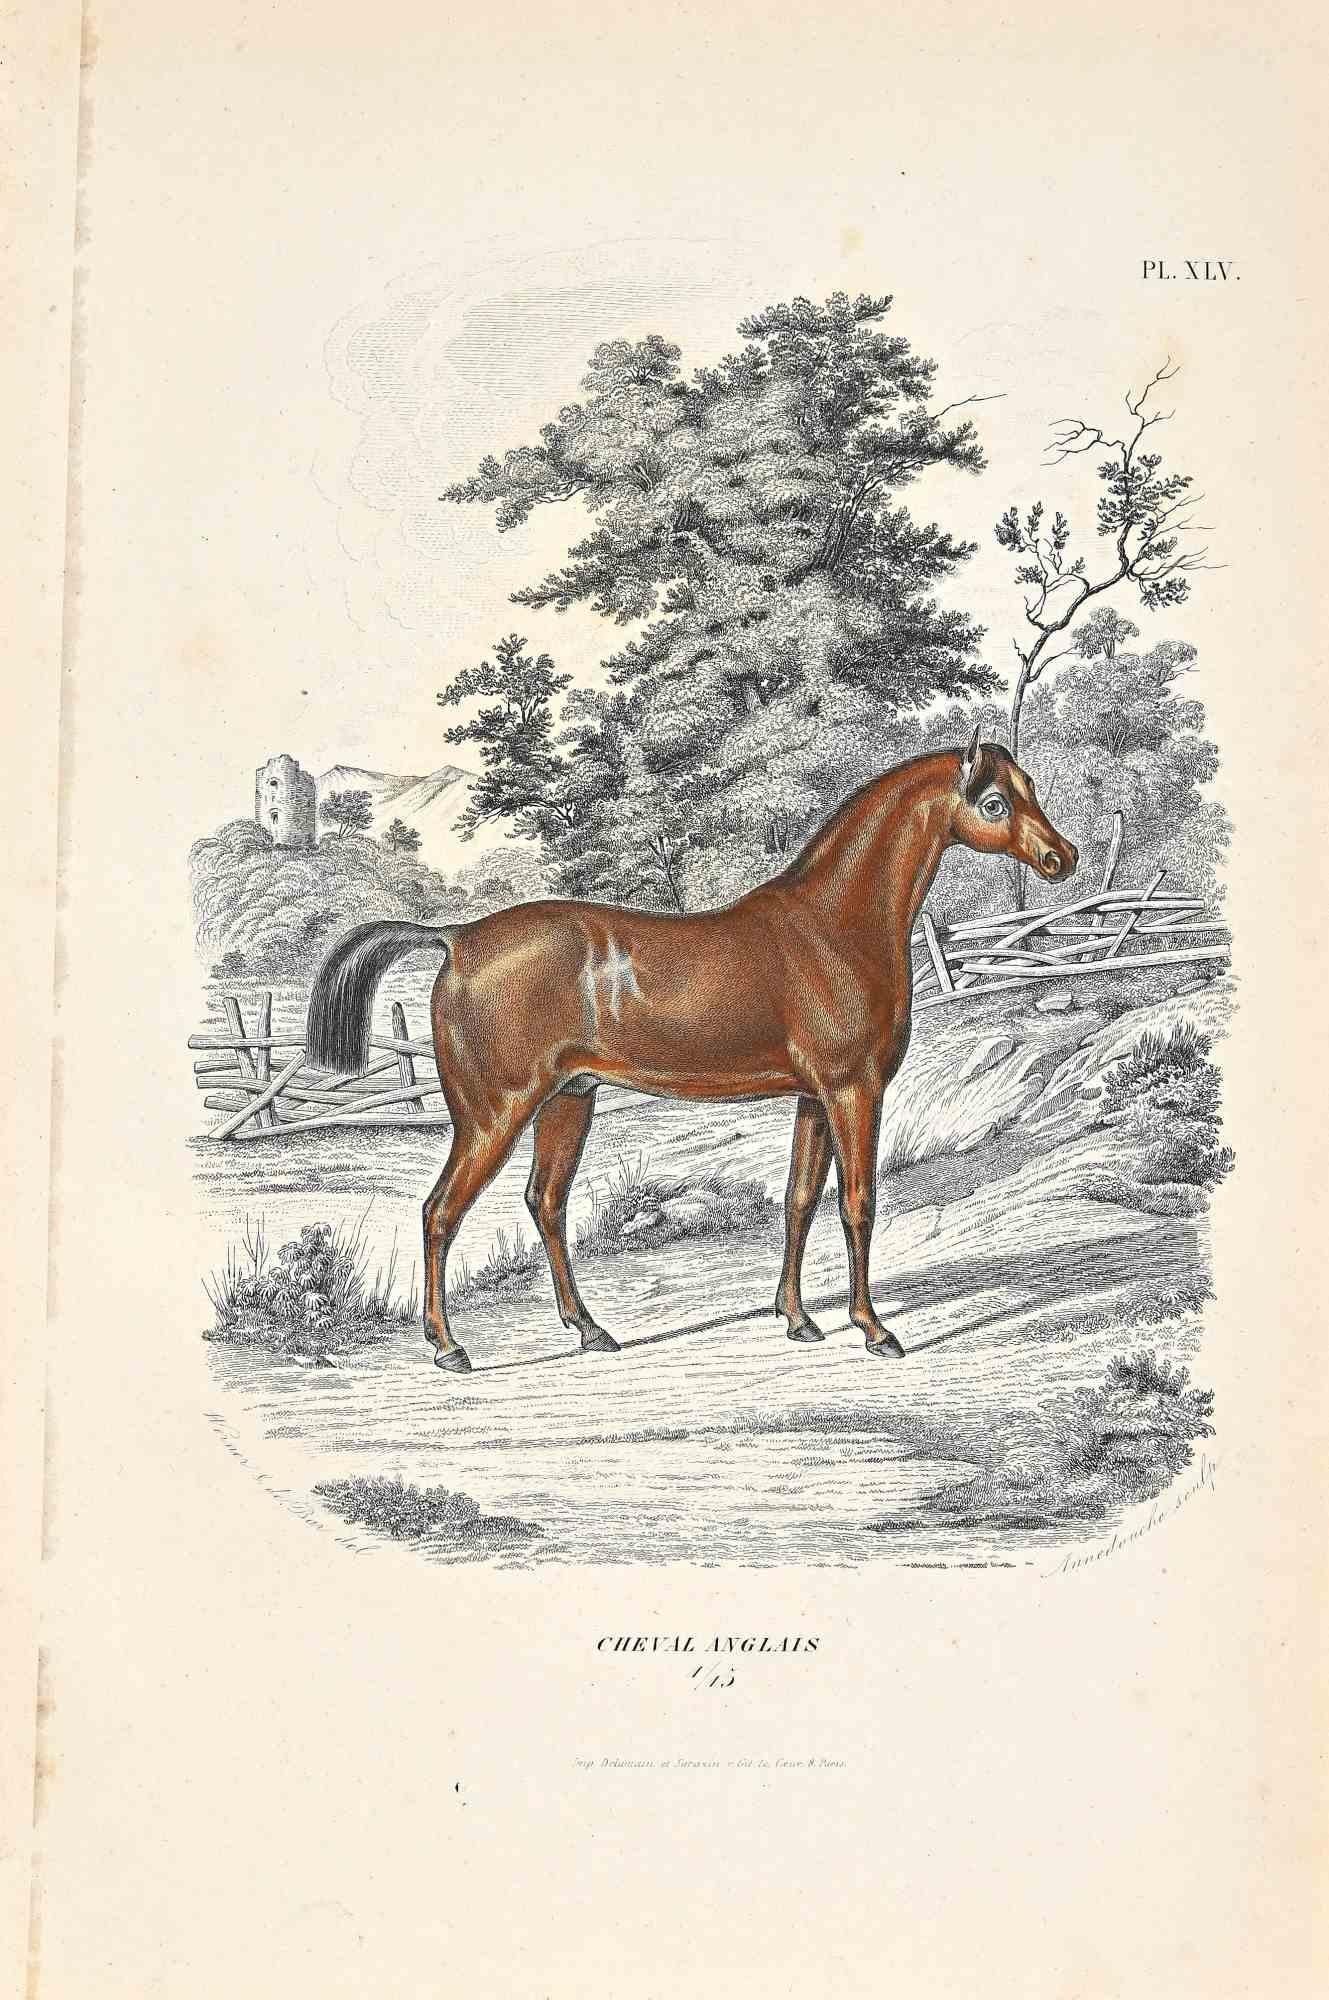 English Horse is an original lithograph on ivory-colored paper, realized by Paul Gervais (1816-1879). The artwork is from The Series of "Les Trois Règnes de la Nature", and was published in 1854.

Good conditions except for some foxings.

Titled on